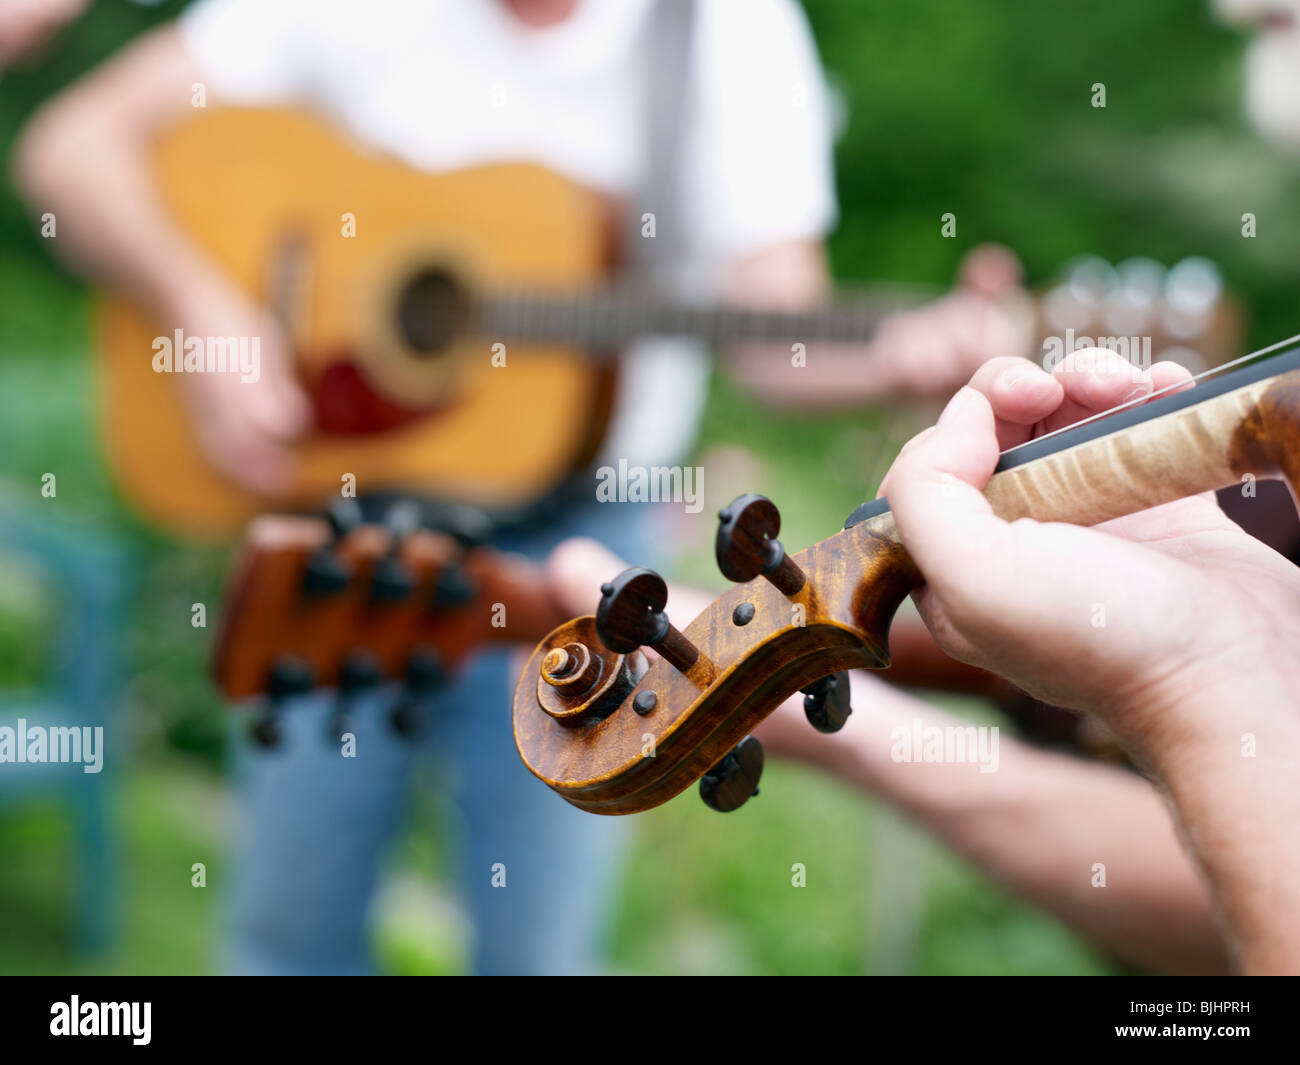 Outdoor musical performance Stock Photo